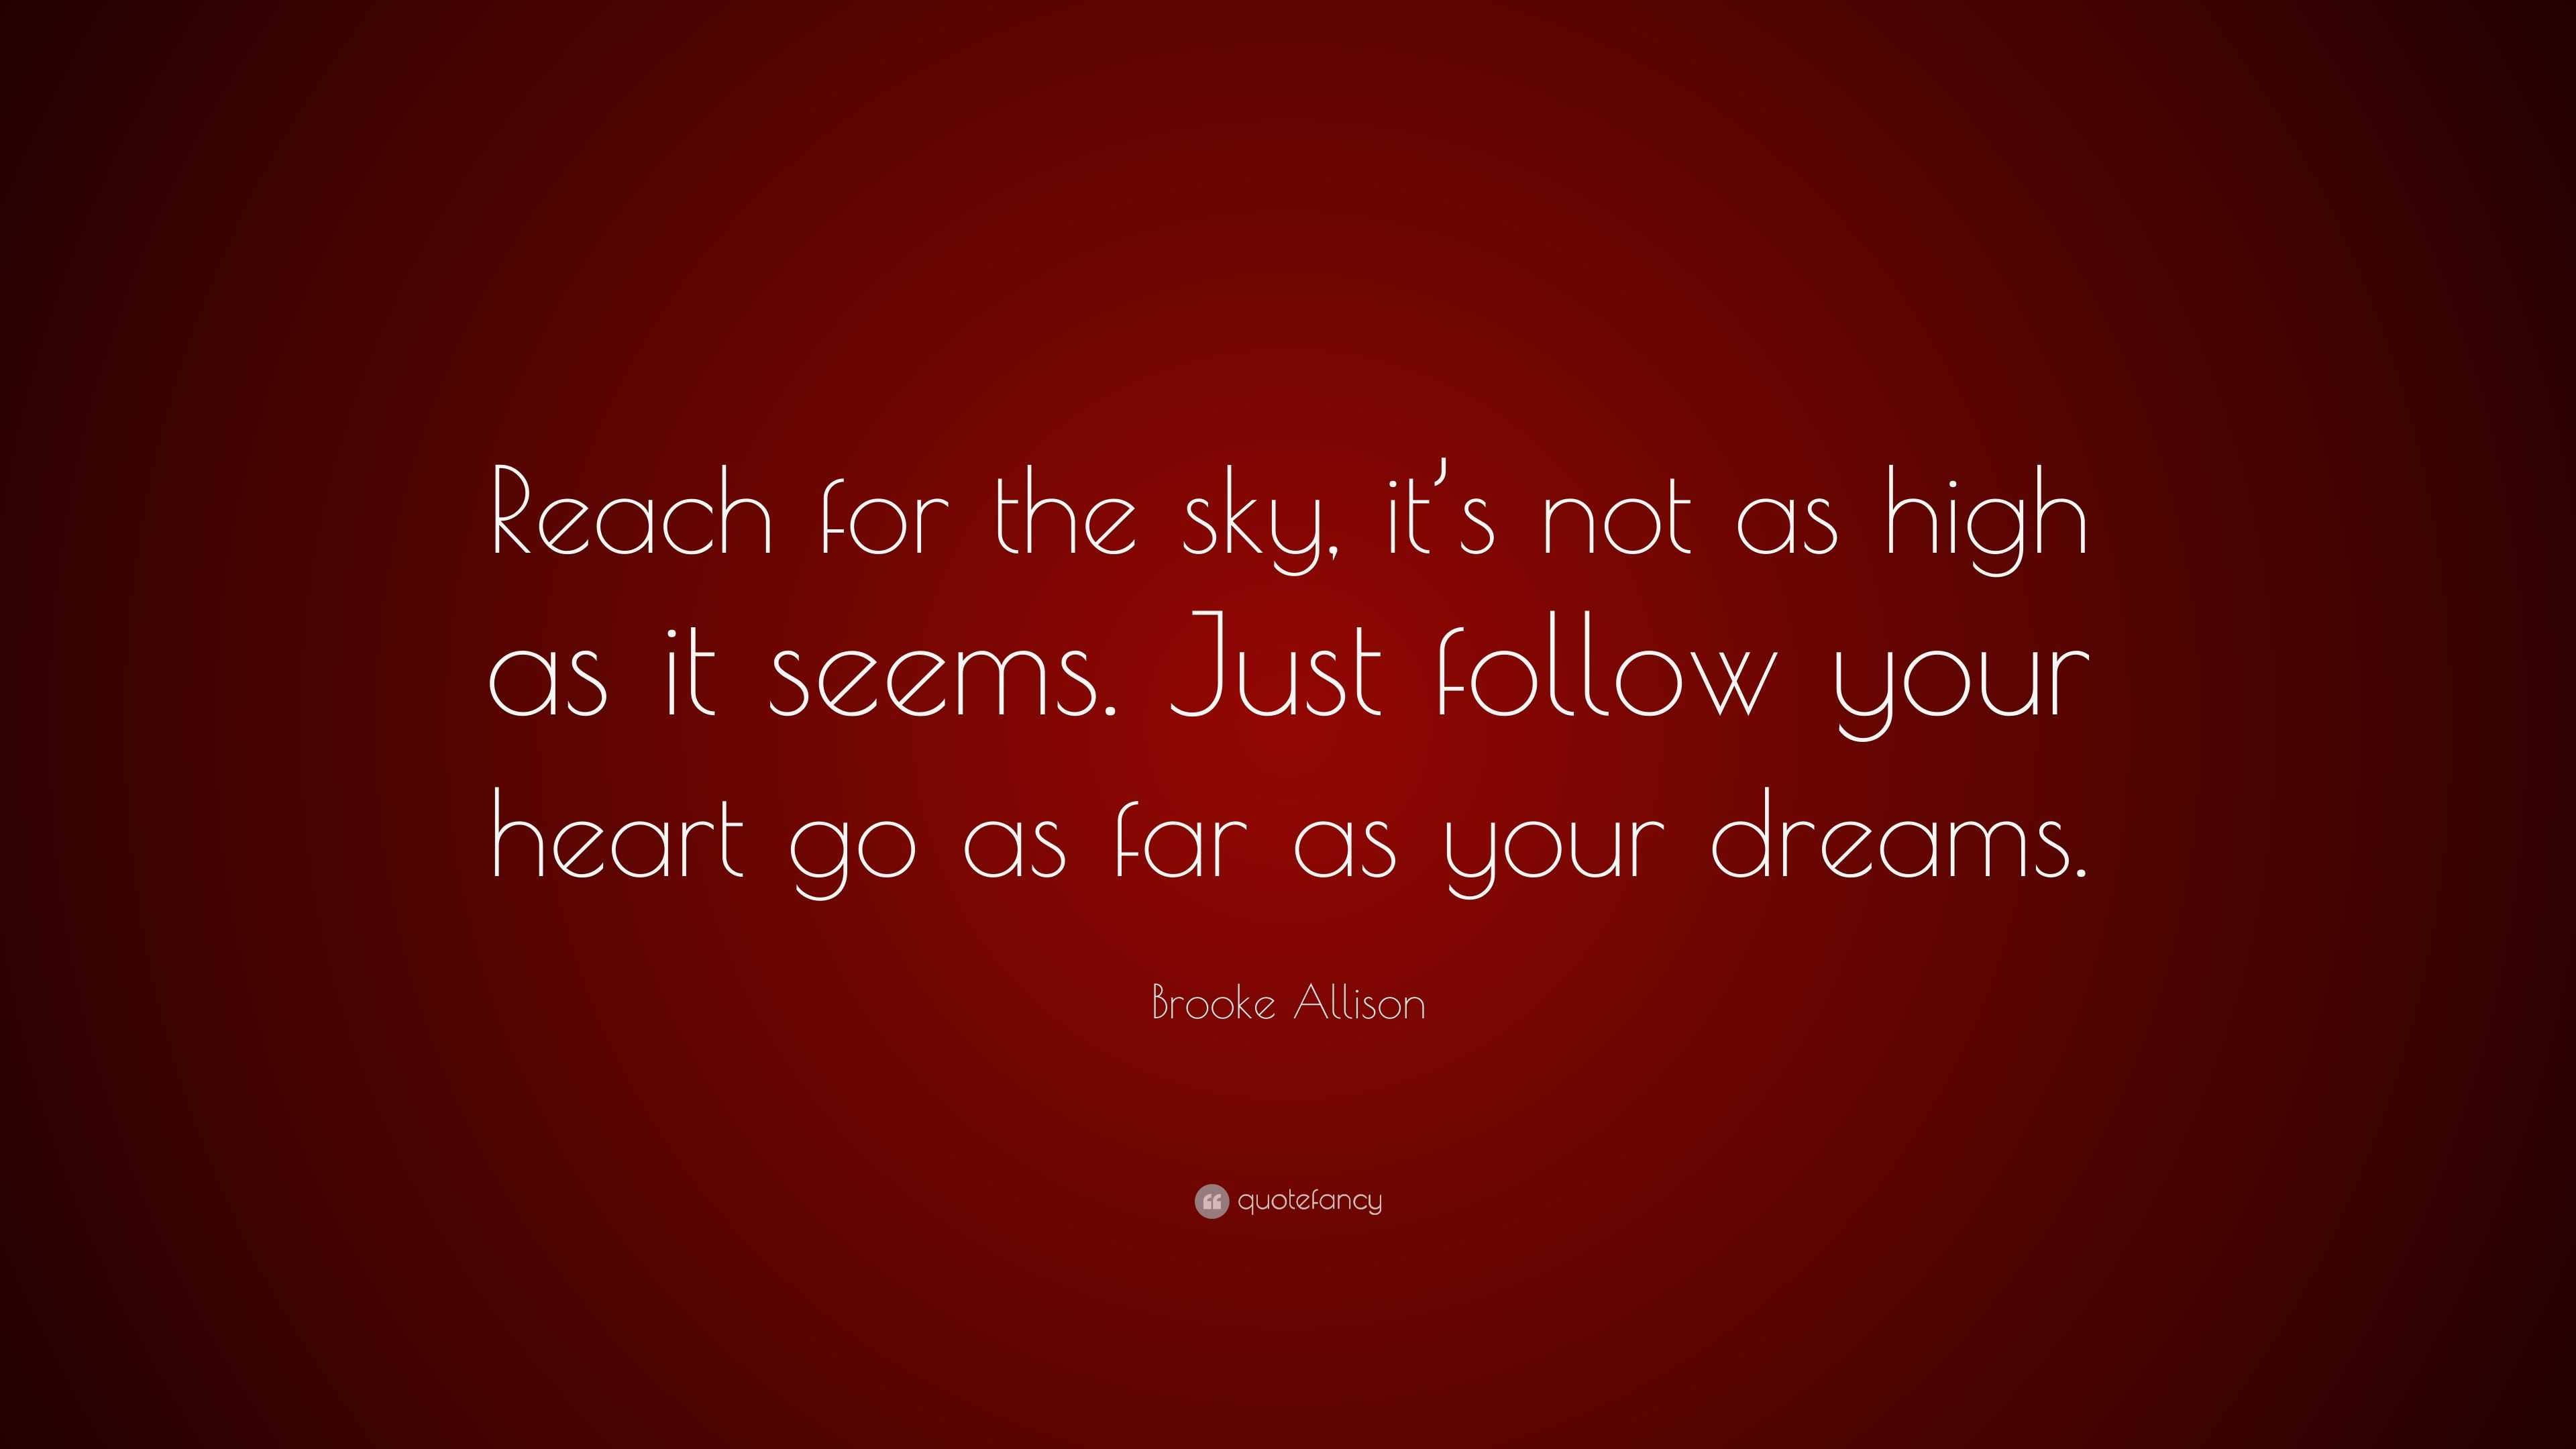 Brooke Allison Quote: "Reach for the sky, it's not as high as it seems. Just follow your heart ...